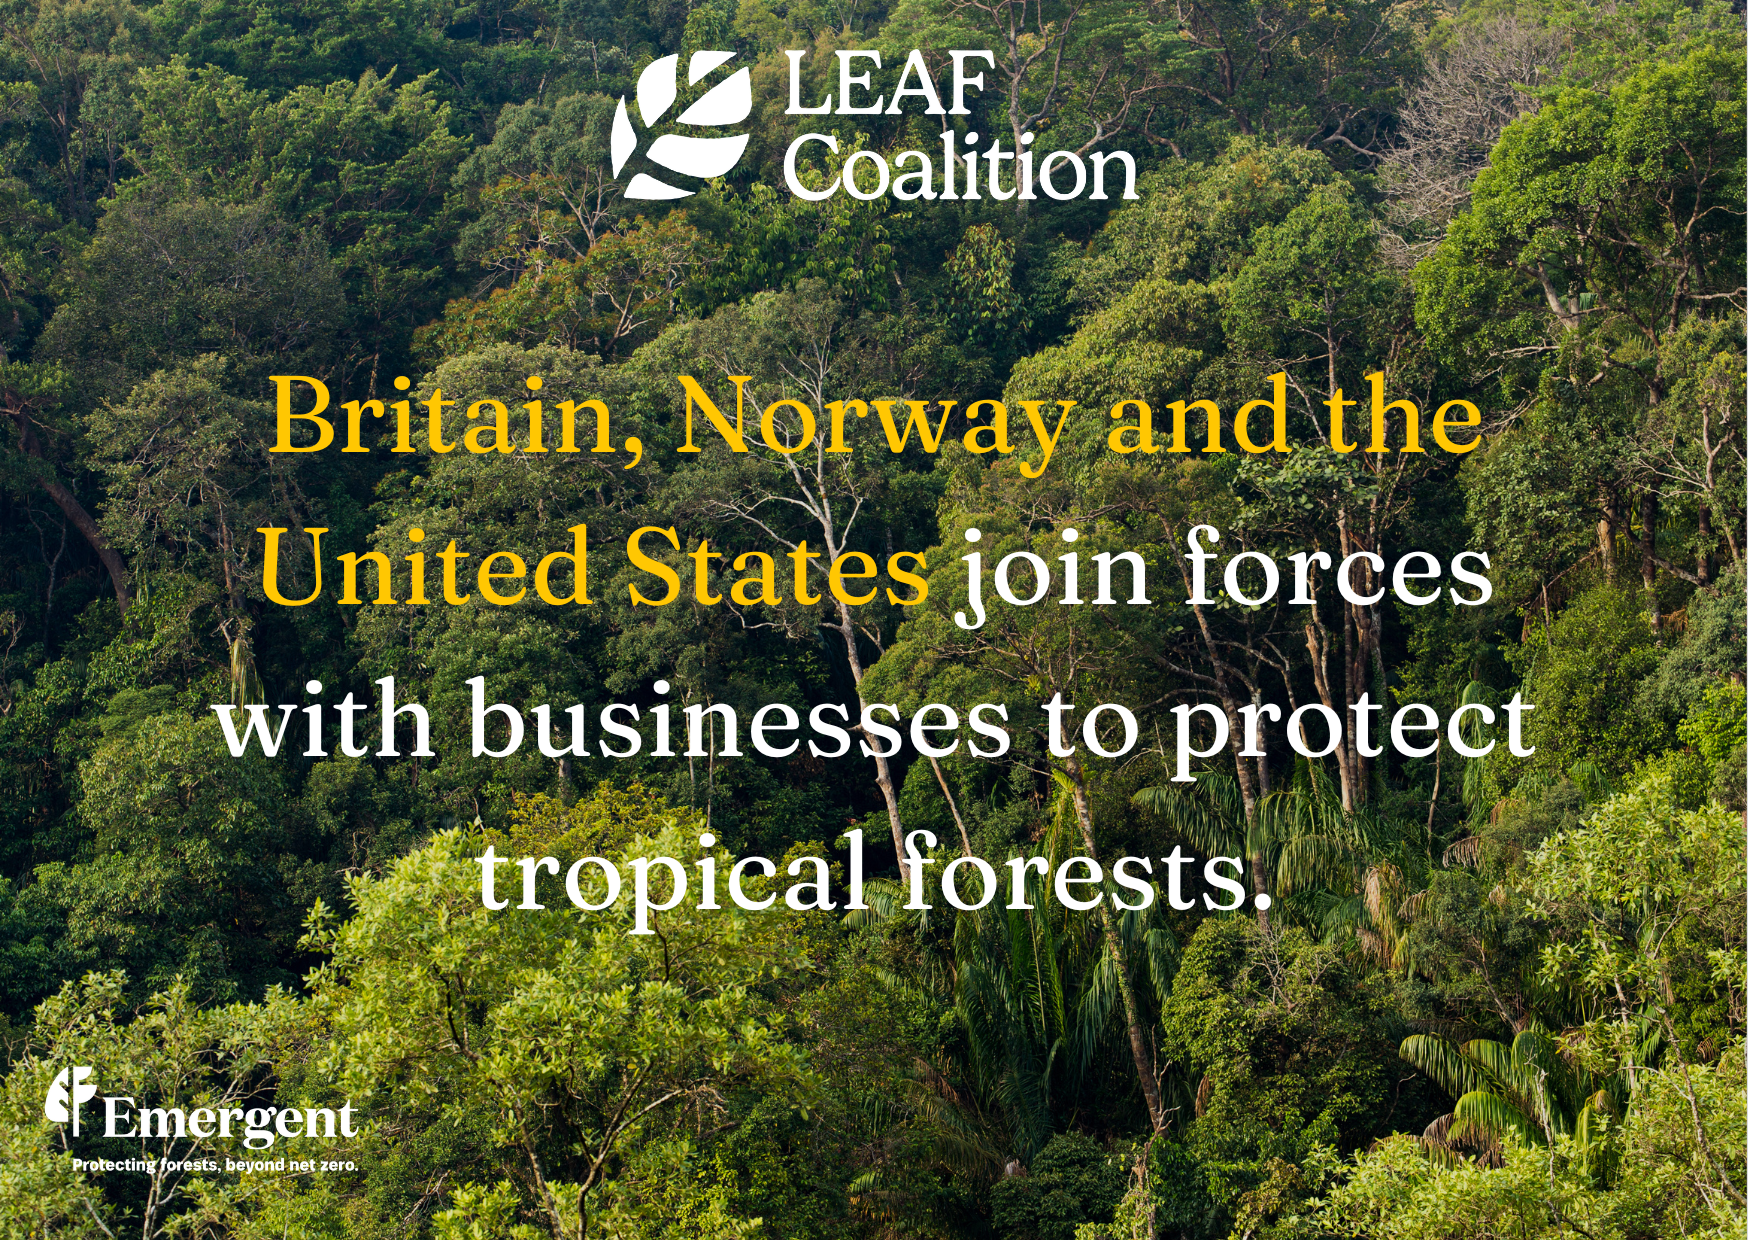 Britain, Norway and the United States join forces with businesses to protect tropical forests.